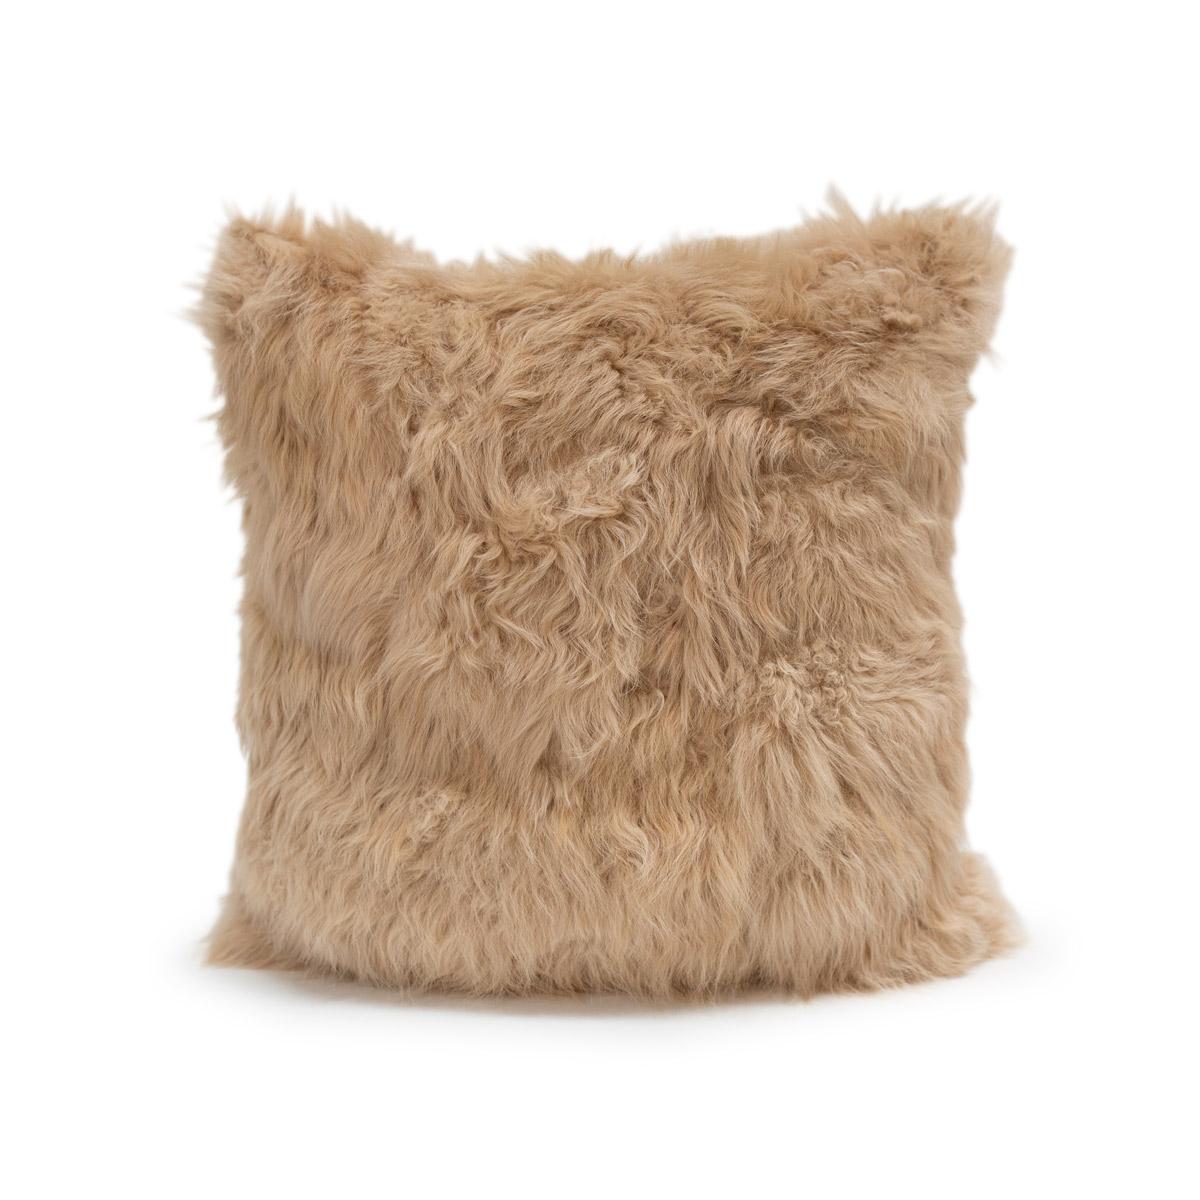 American JG Switzer Toscana Real Fur Both Sides, Teddy Bear Pillow For Sale